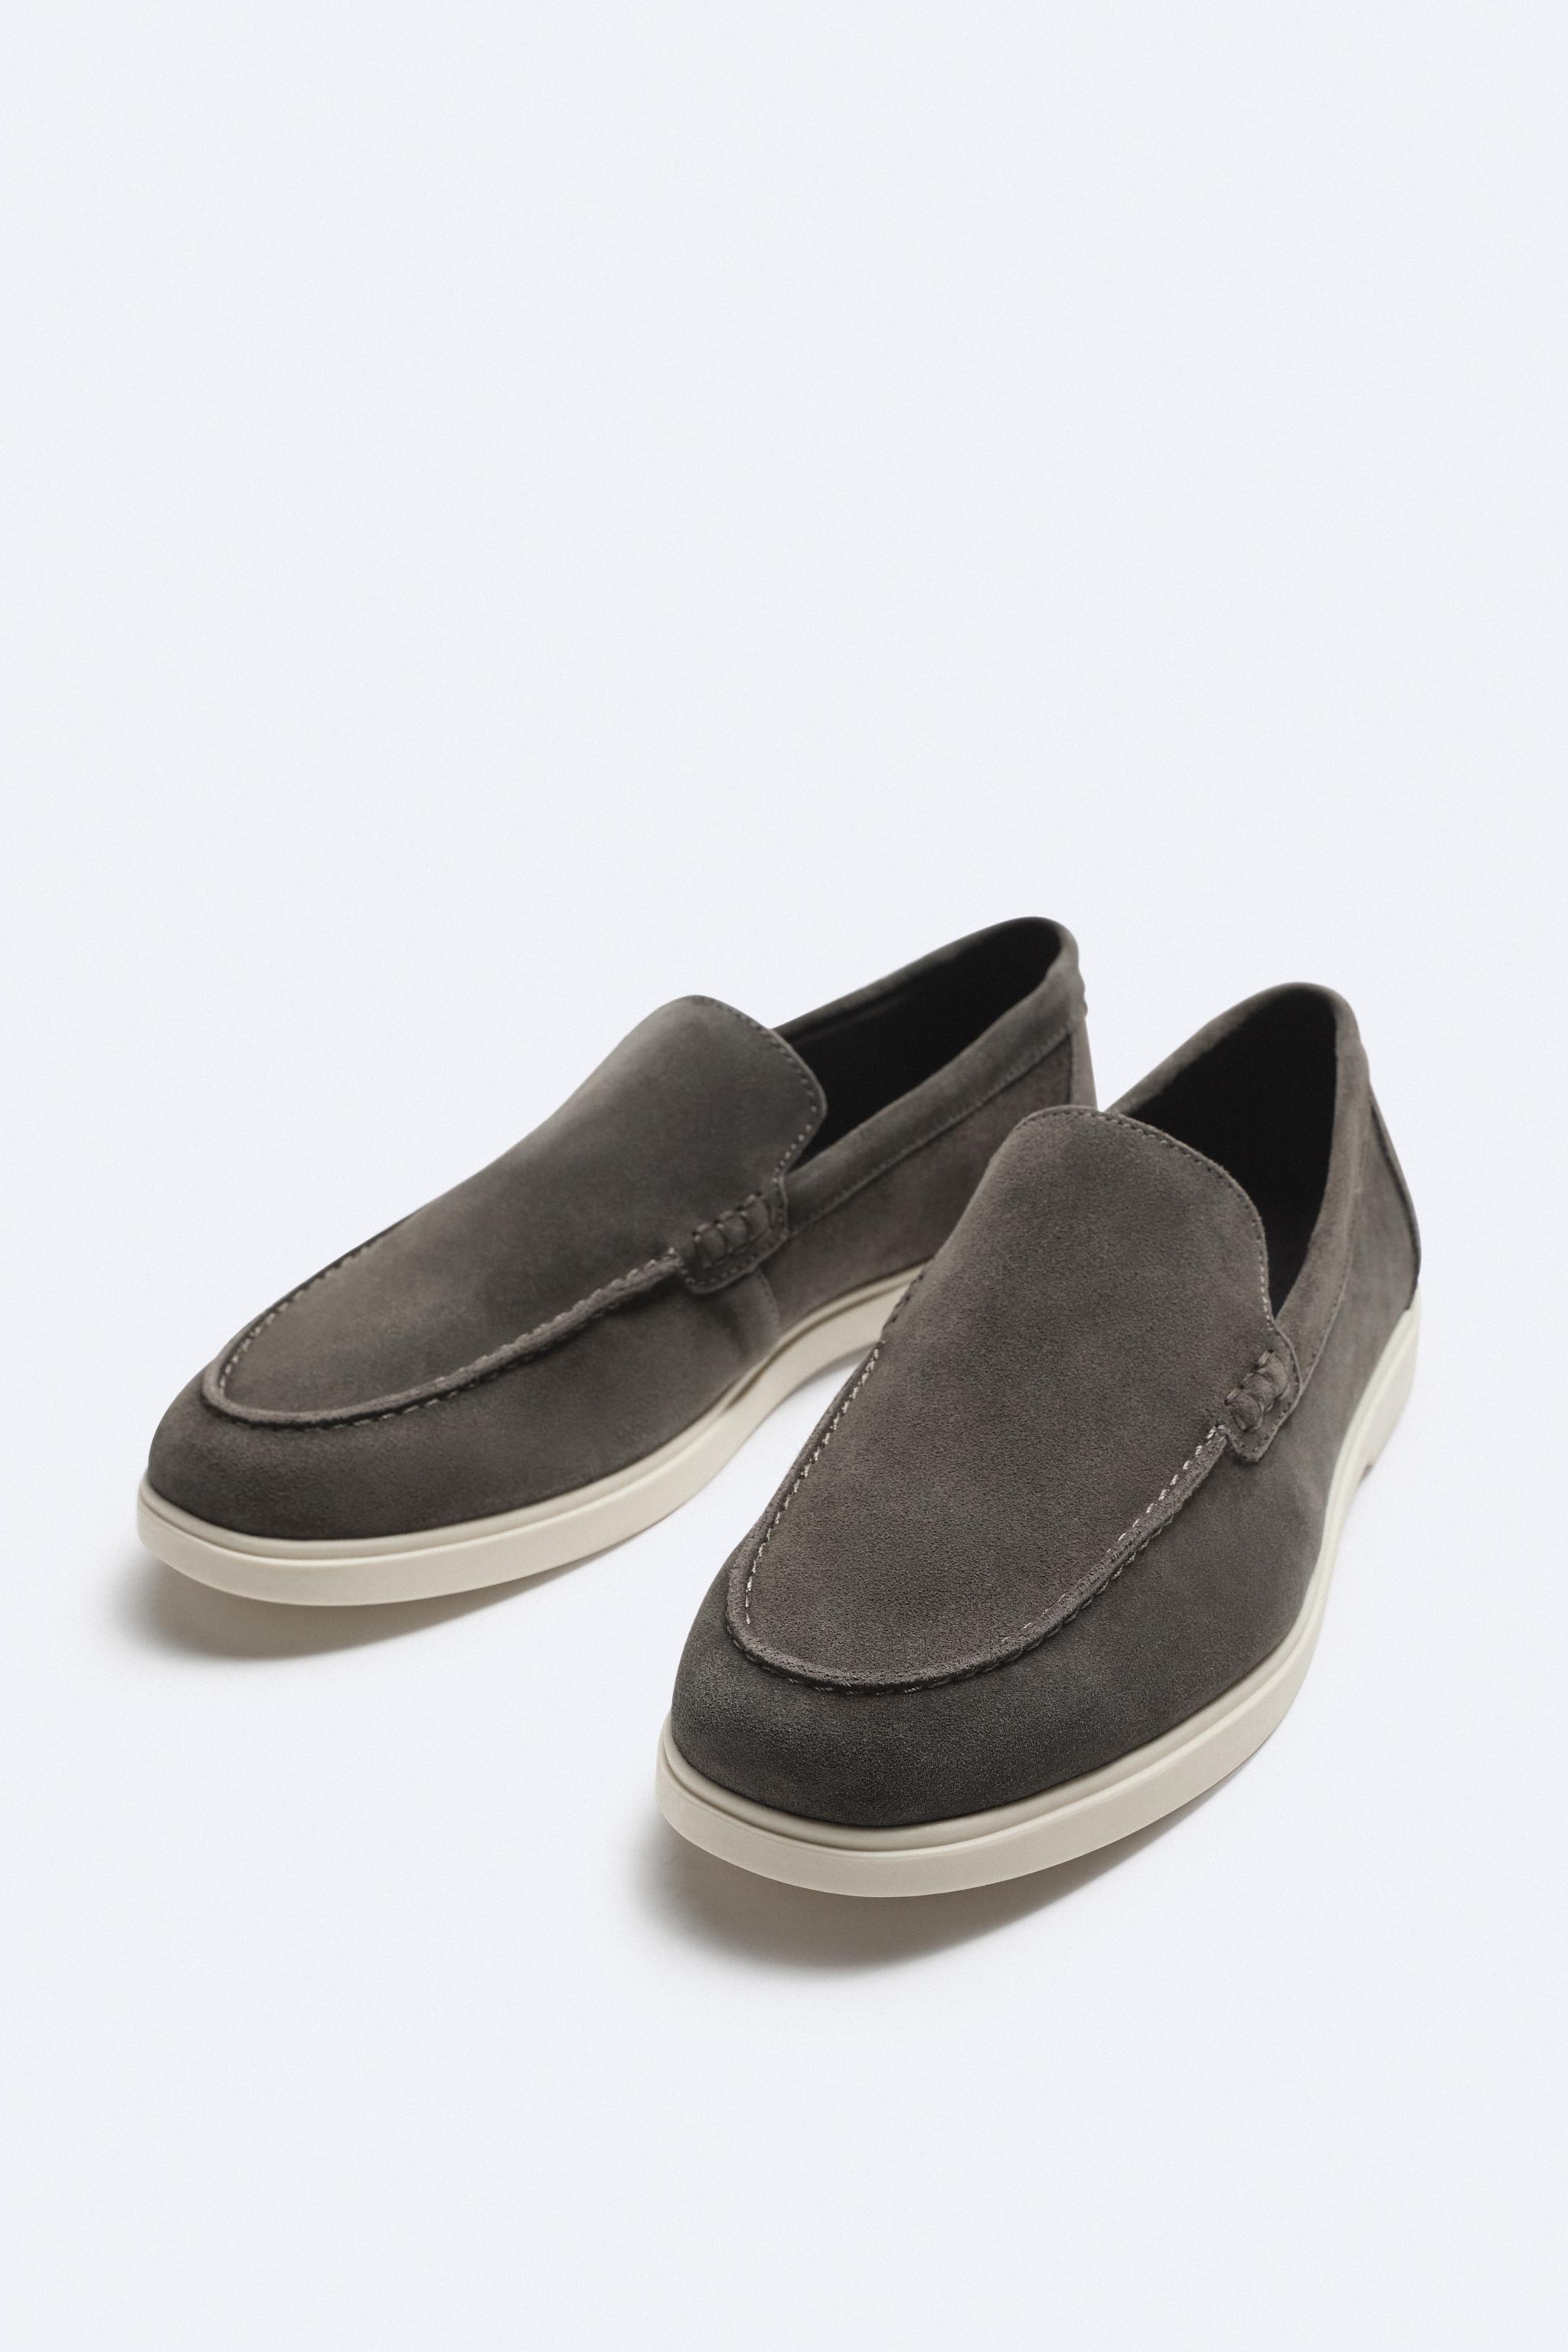 CASUAL SUEDE LOAFERS | ZARA United States